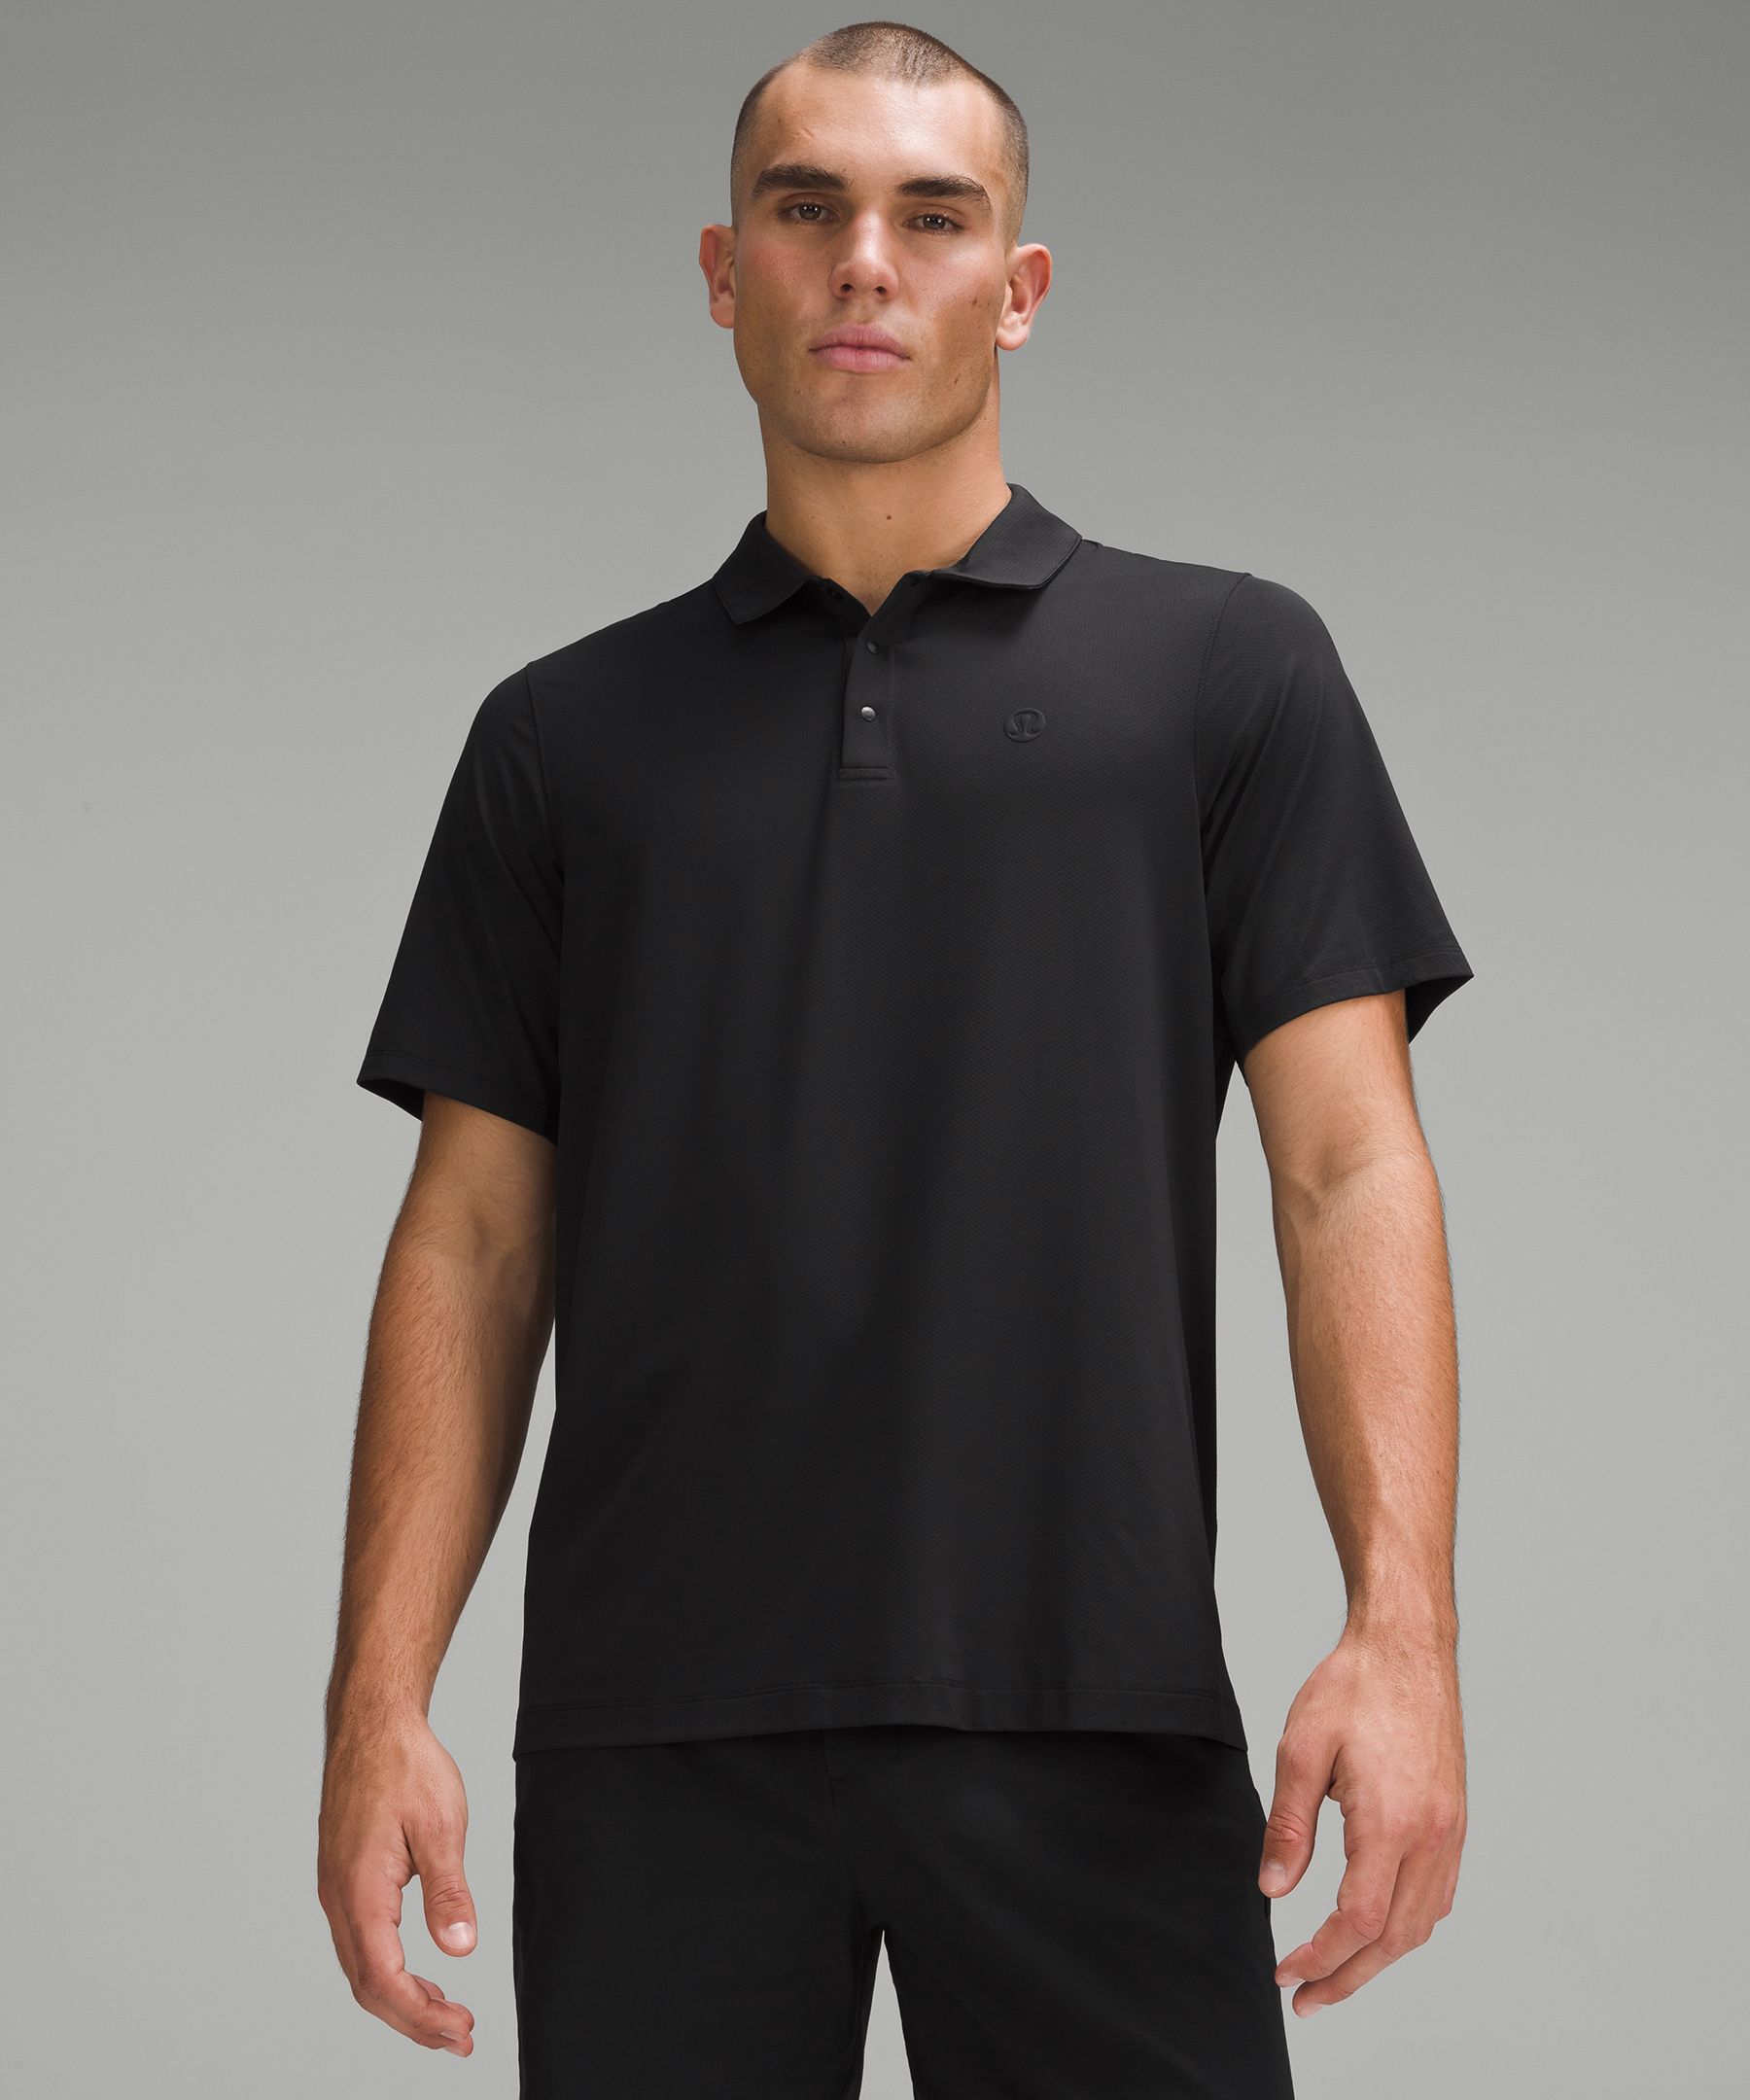 Muscle Polo Shirts for Men Slim Fit Short Sleeve Golf Shirts Men